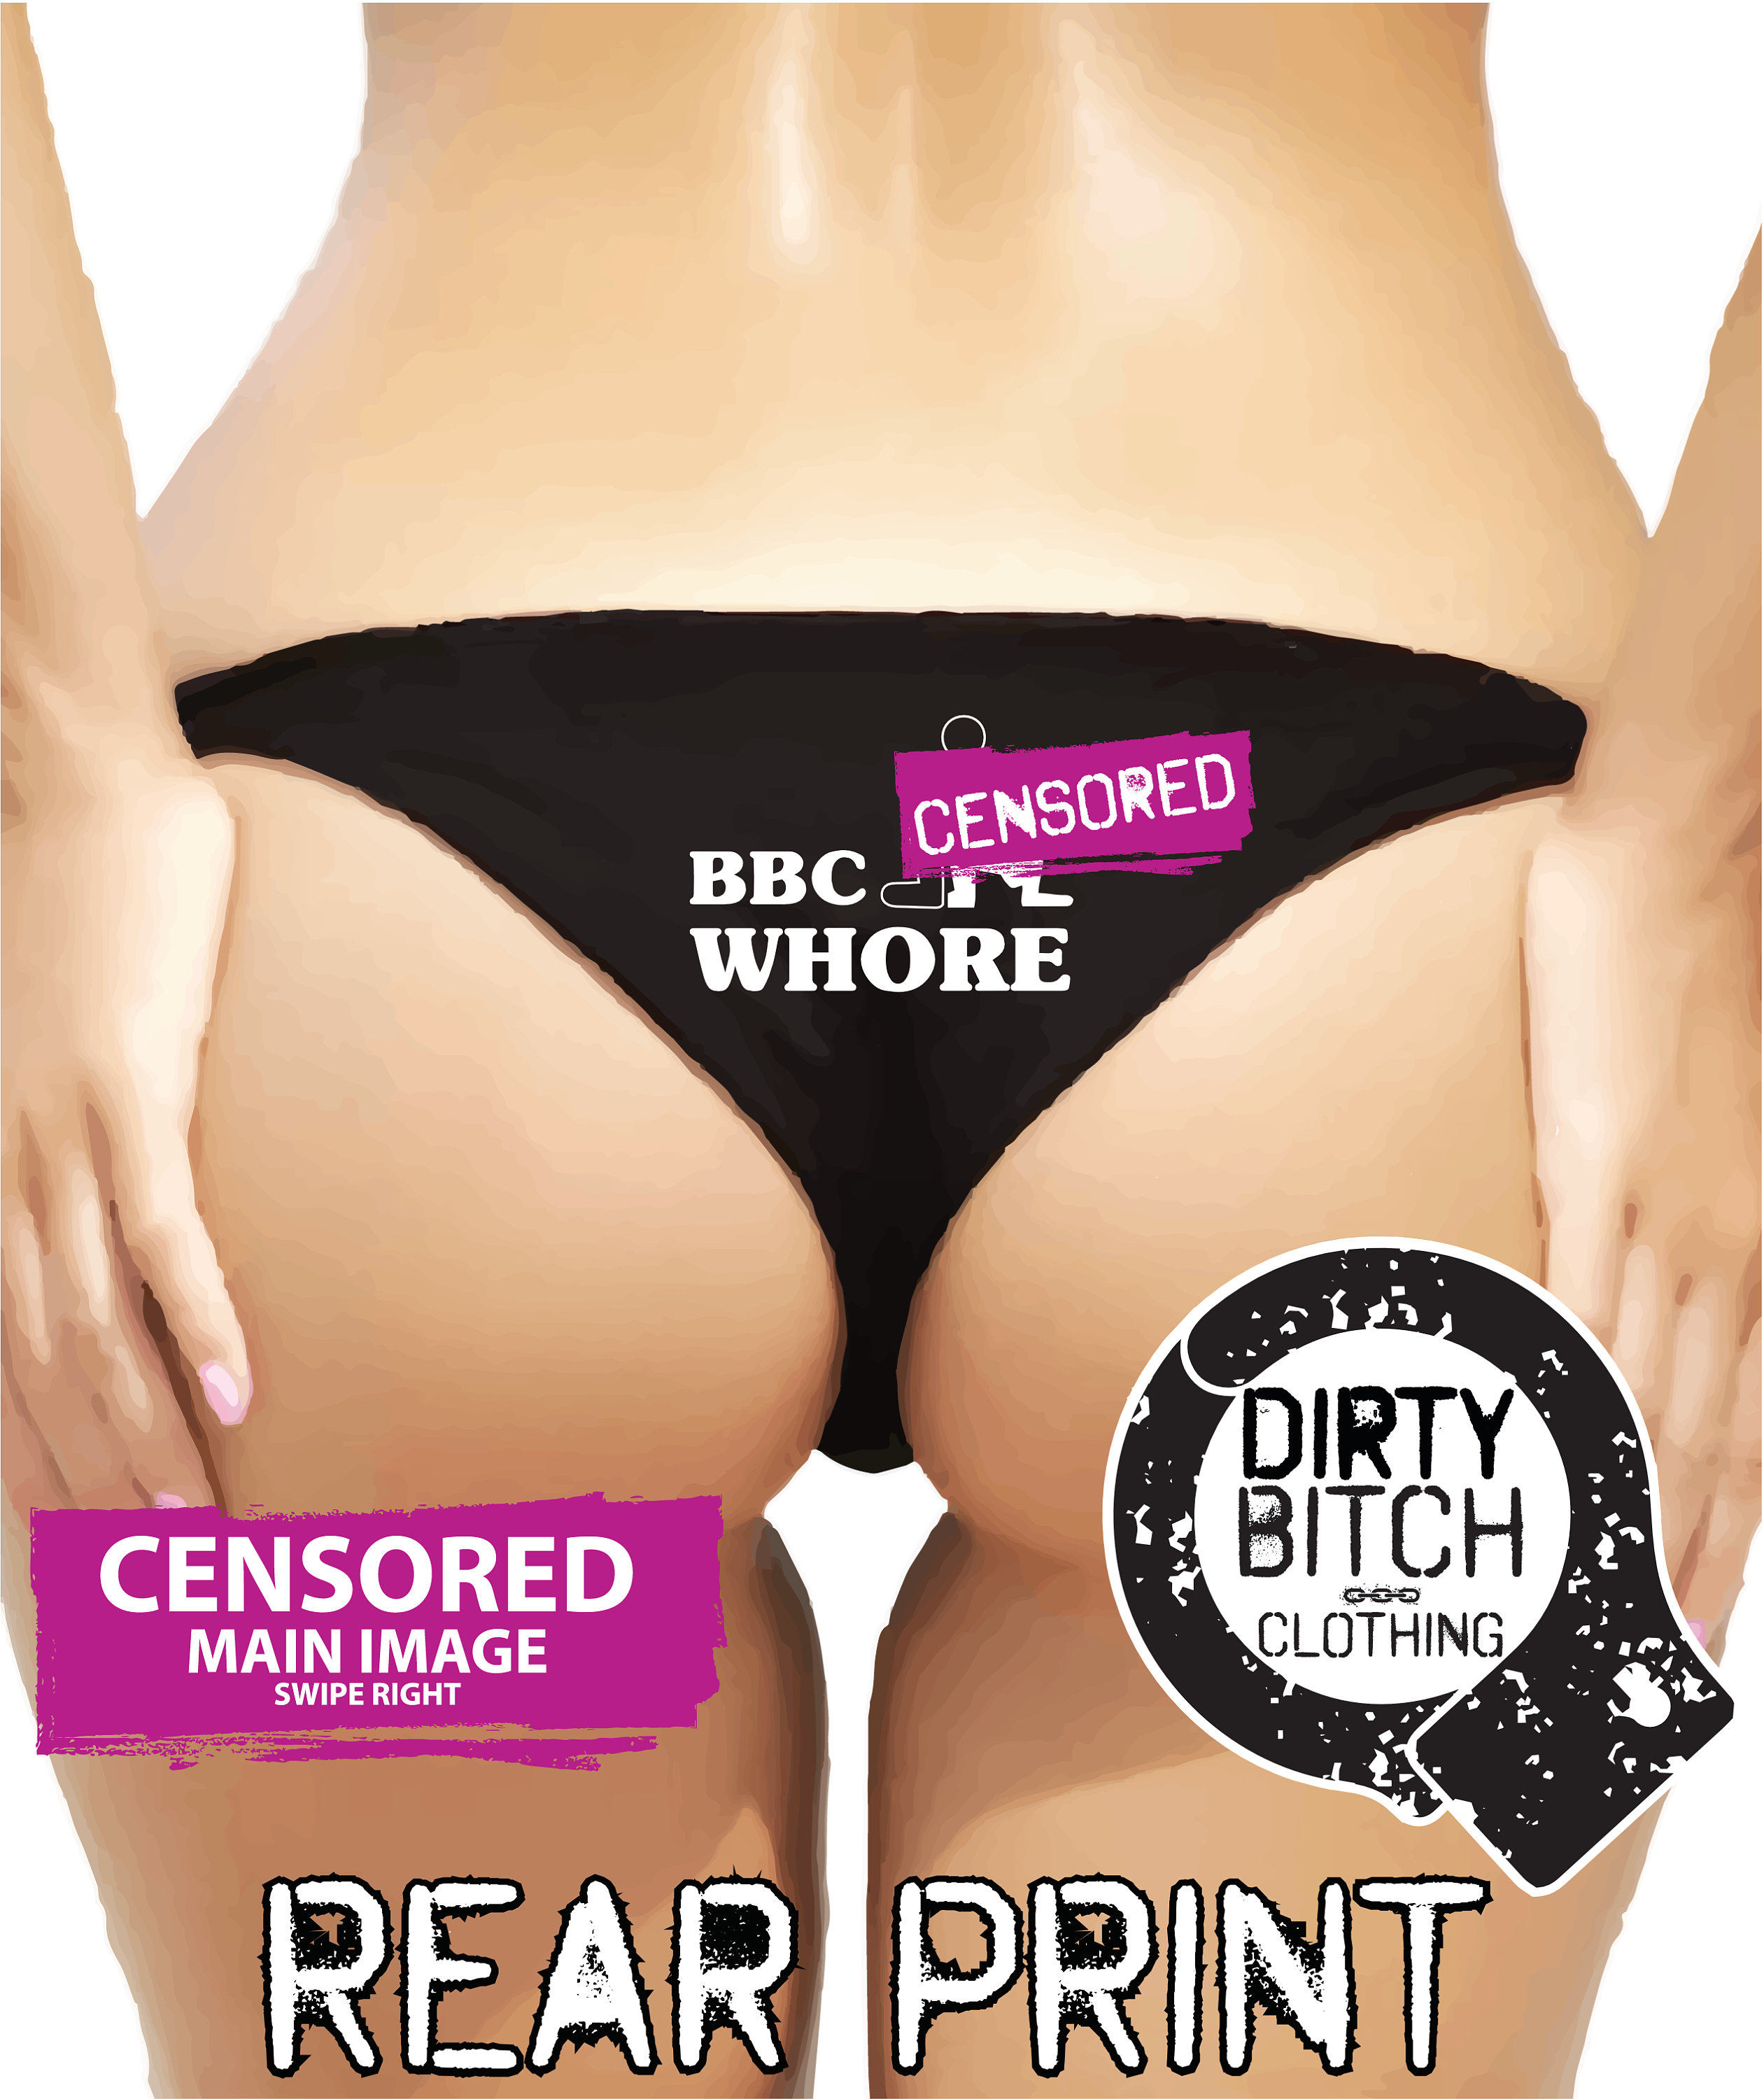 BBC Whore rear Print Adult Knickershotwife Cuckold image picture